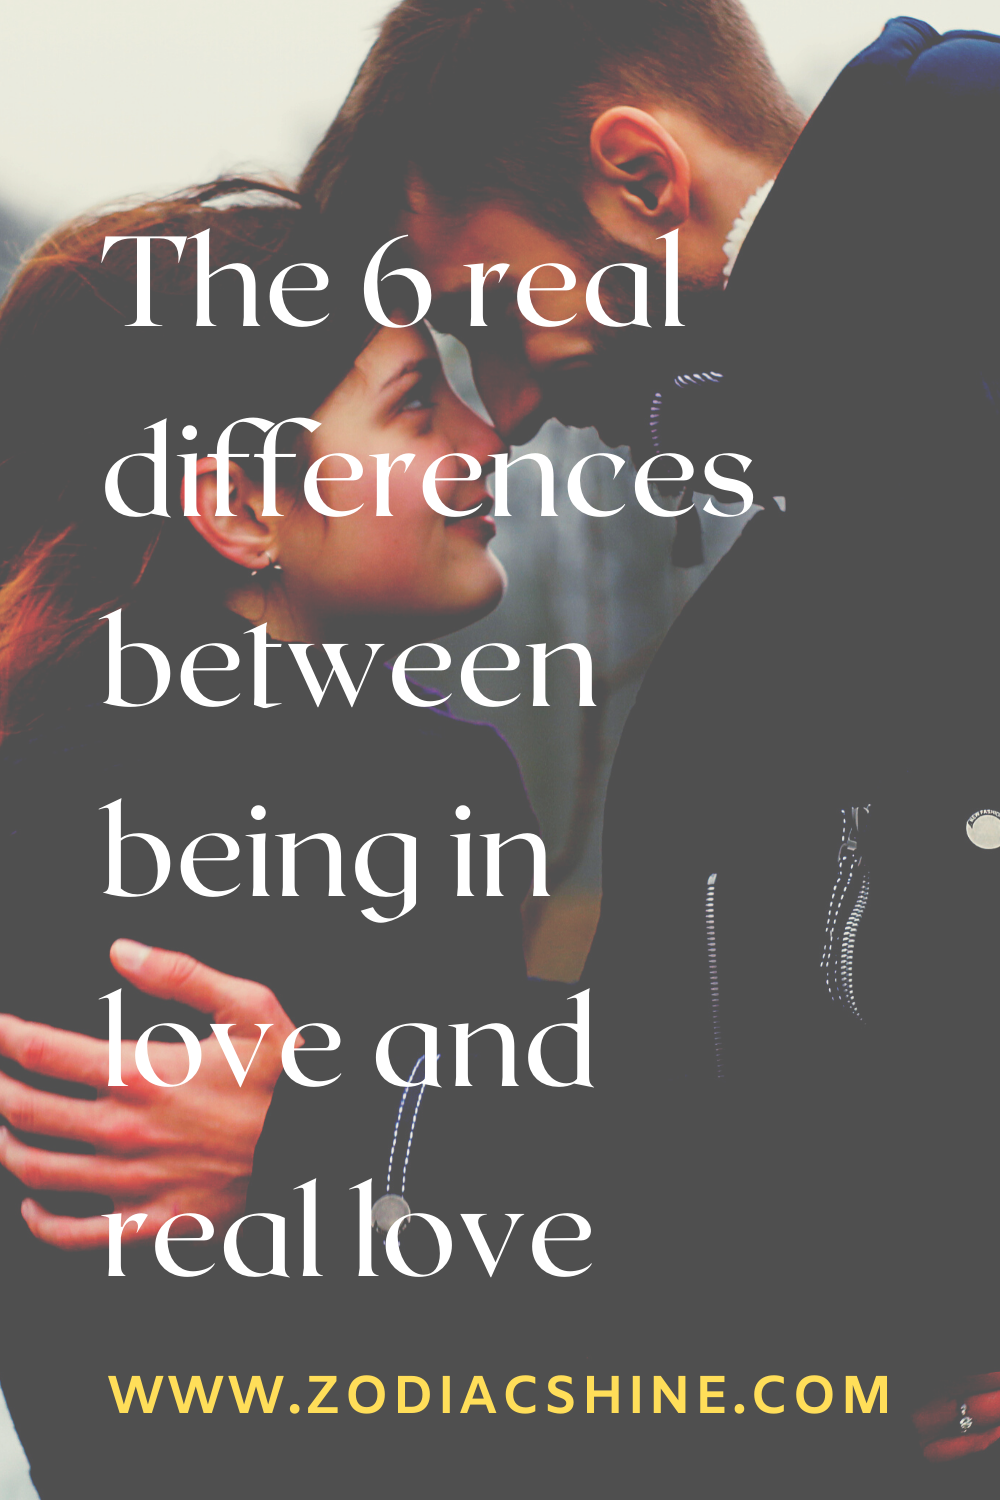 The 6 real differences between being in love and real love